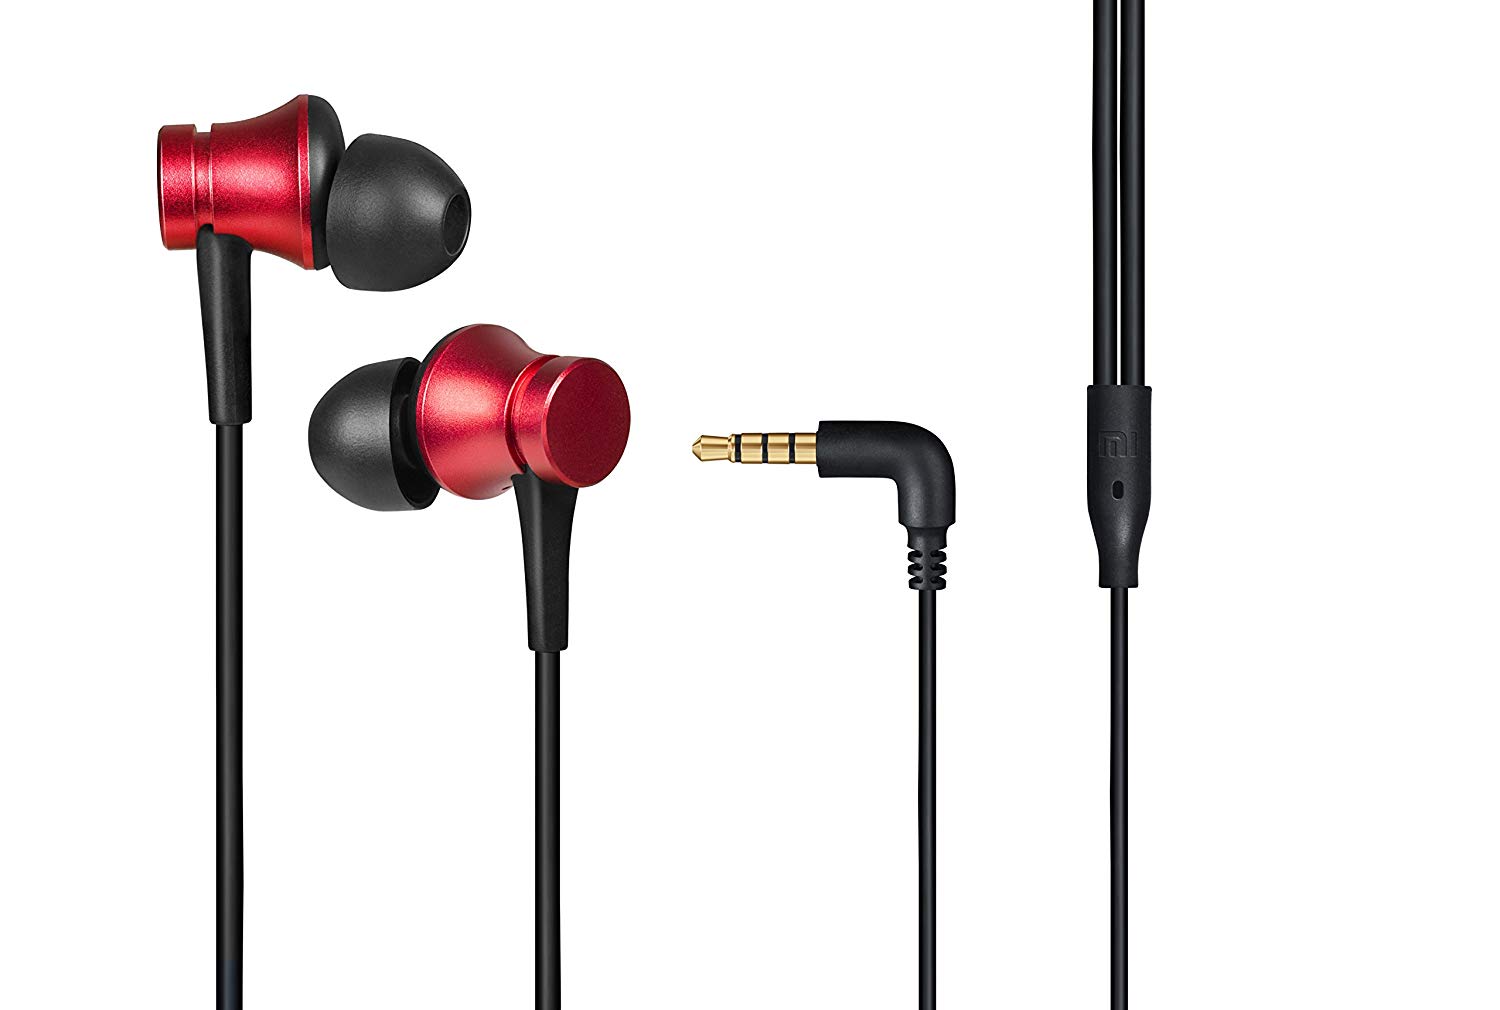 Mi Earphones Basic (Ultra Deep Bass, With Mic, In-Ear, Wired, Without Noise Cancellation
)